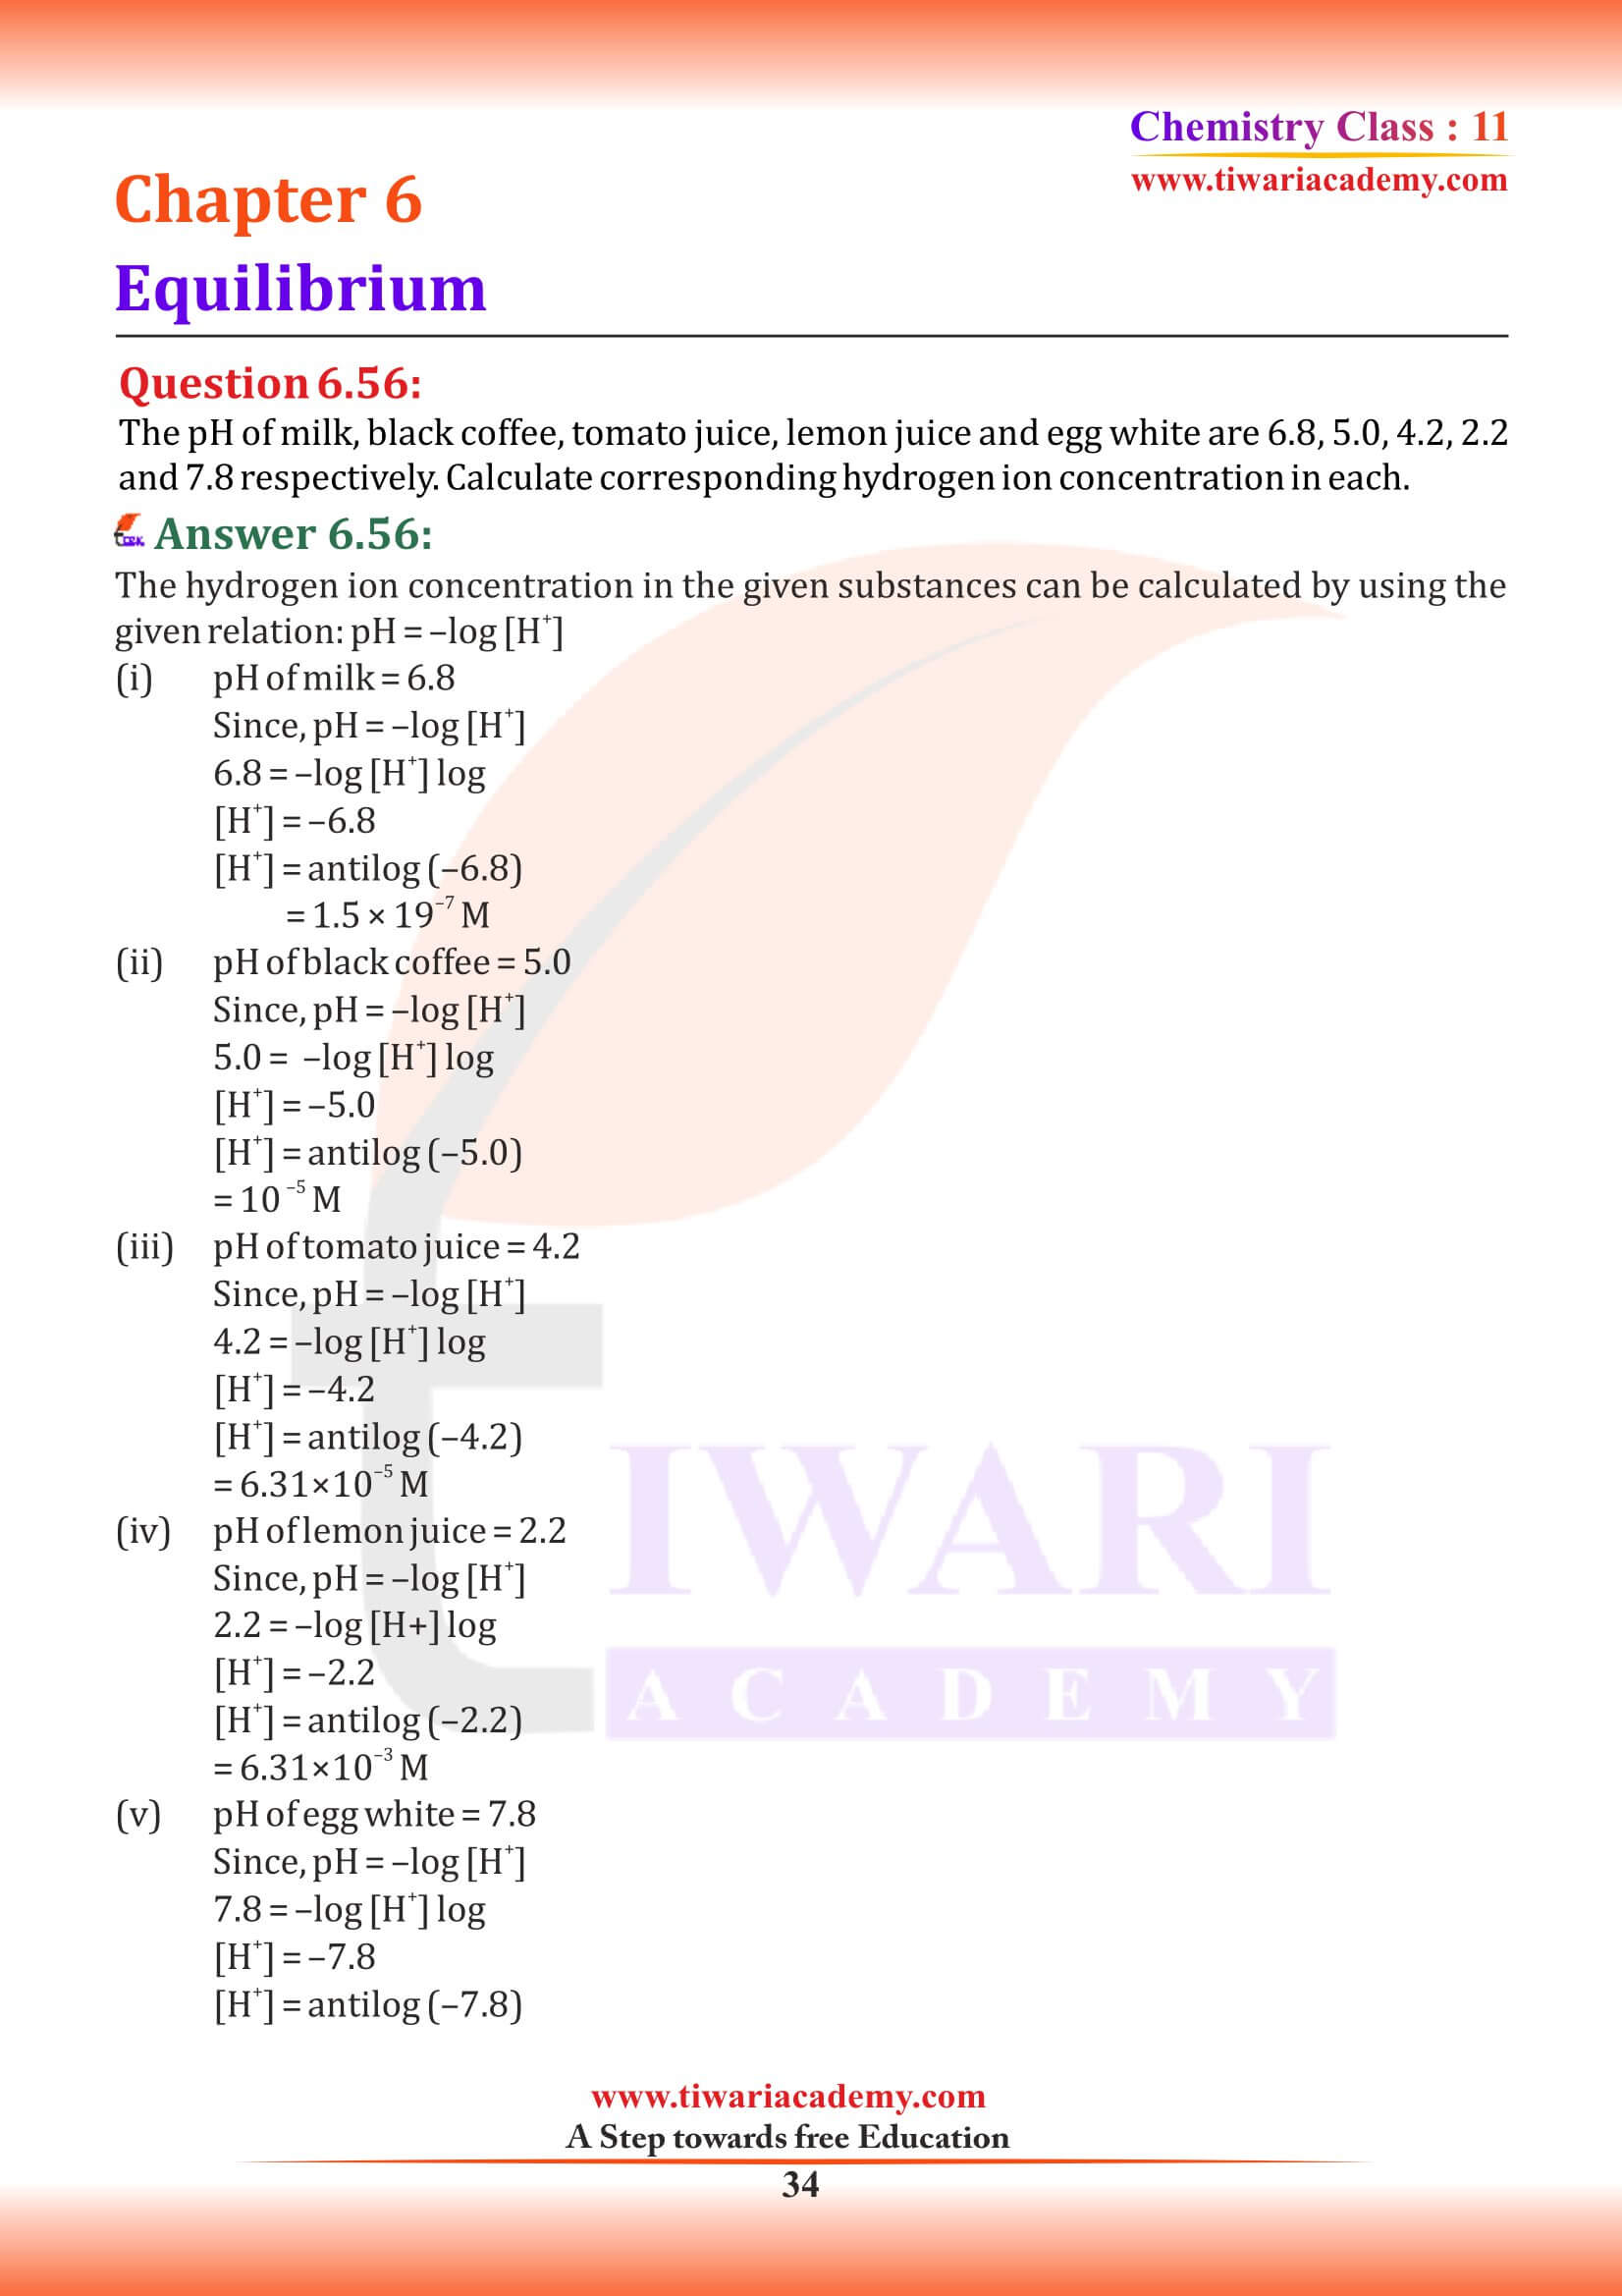 NCERT Class 11 Chemistry Chapter 6 practice